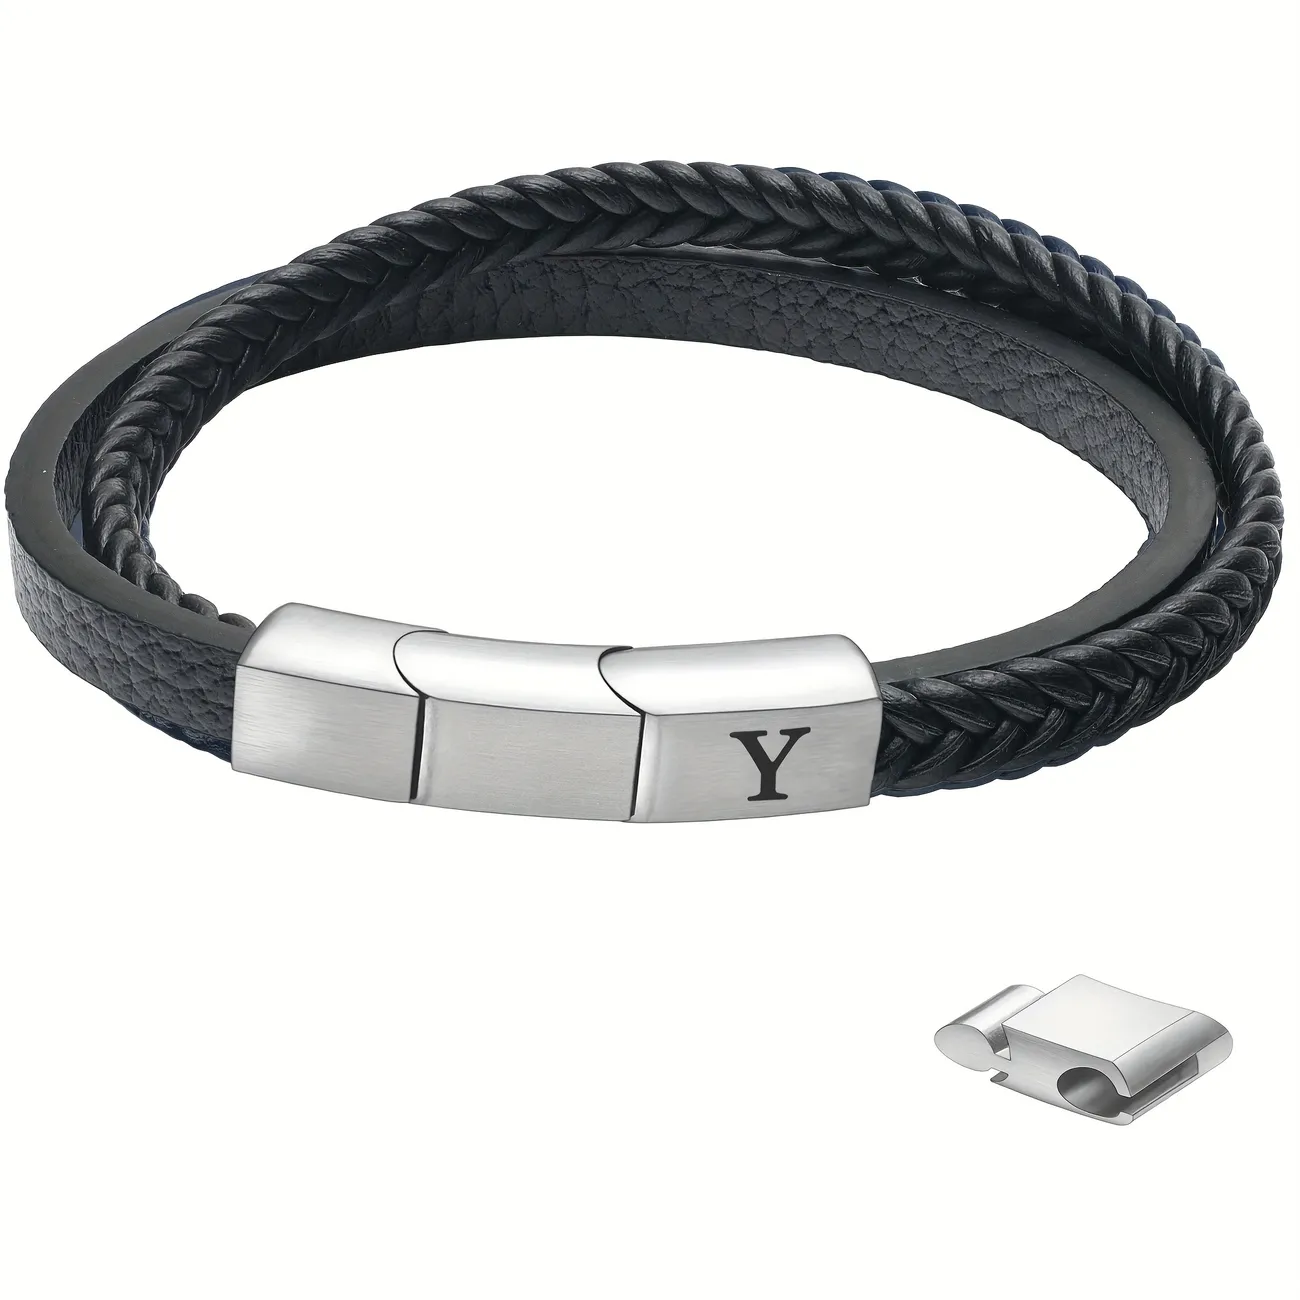 Men's Double-layer Braided Leather Bracelet With Adjustable